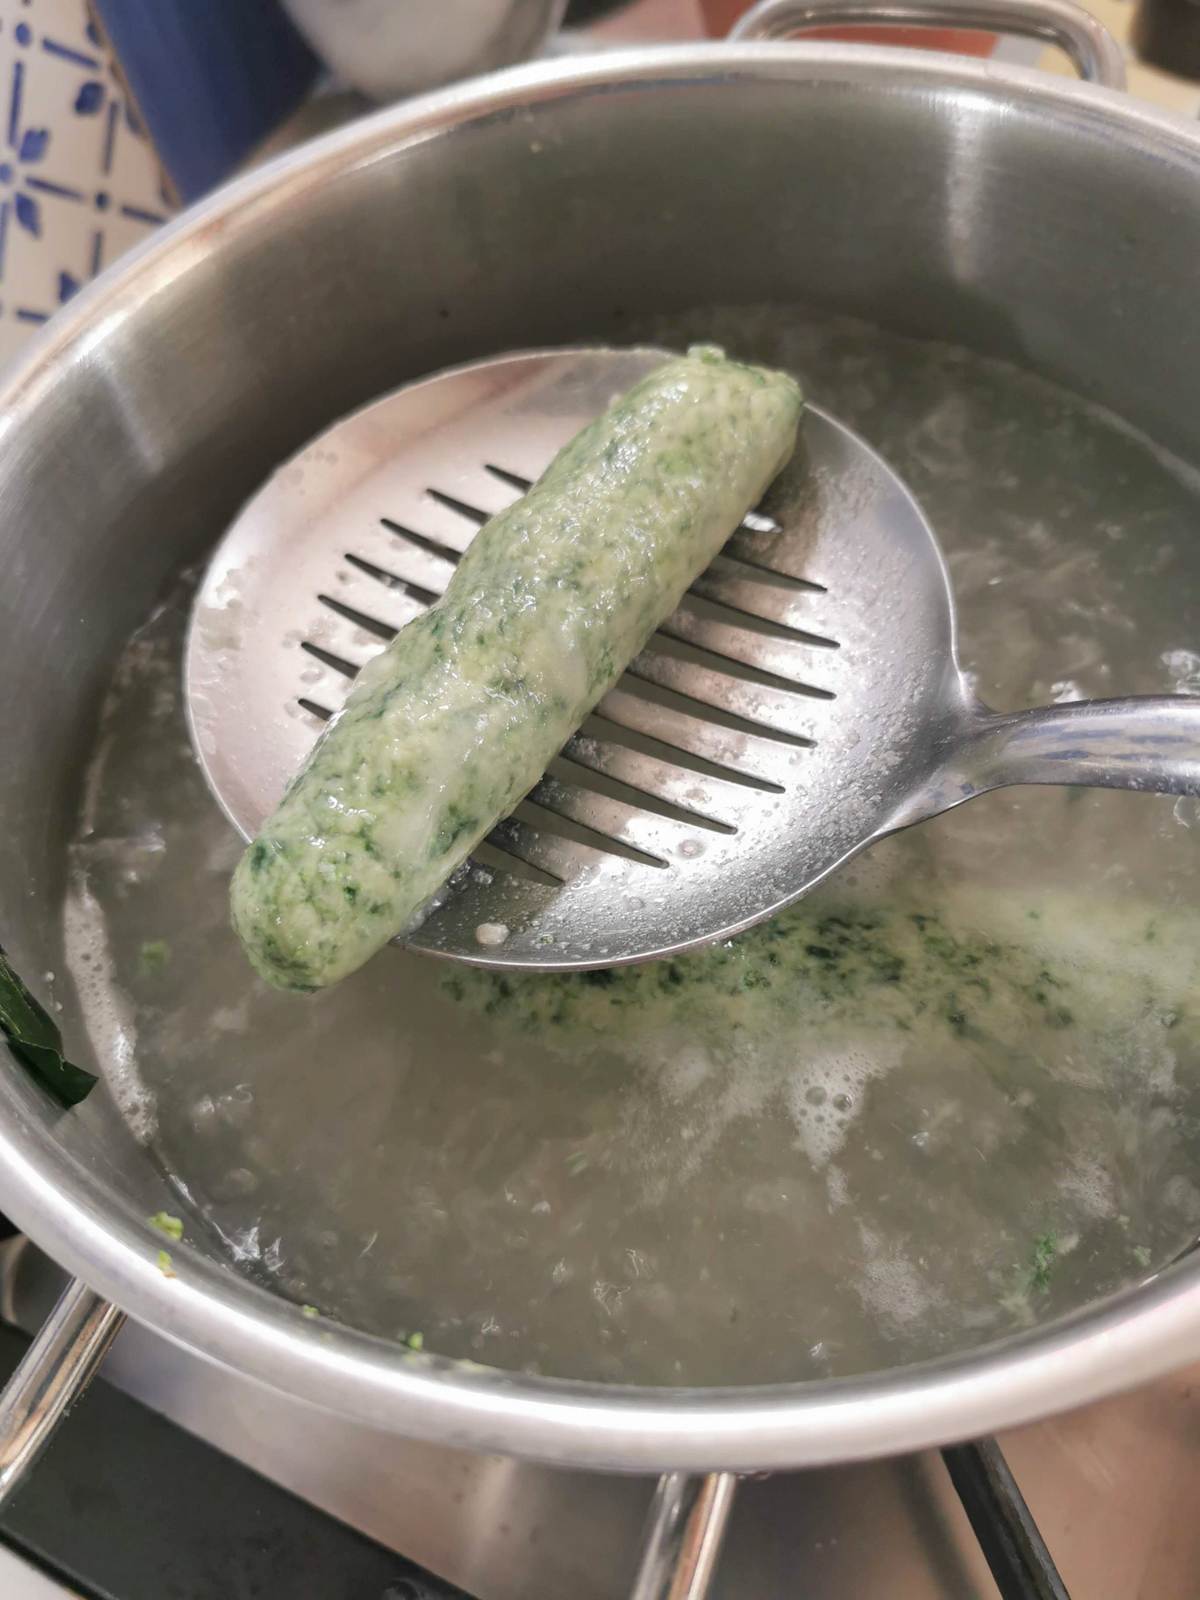 One spinach gnocchi on slotted spoon held over pot of boiling water.